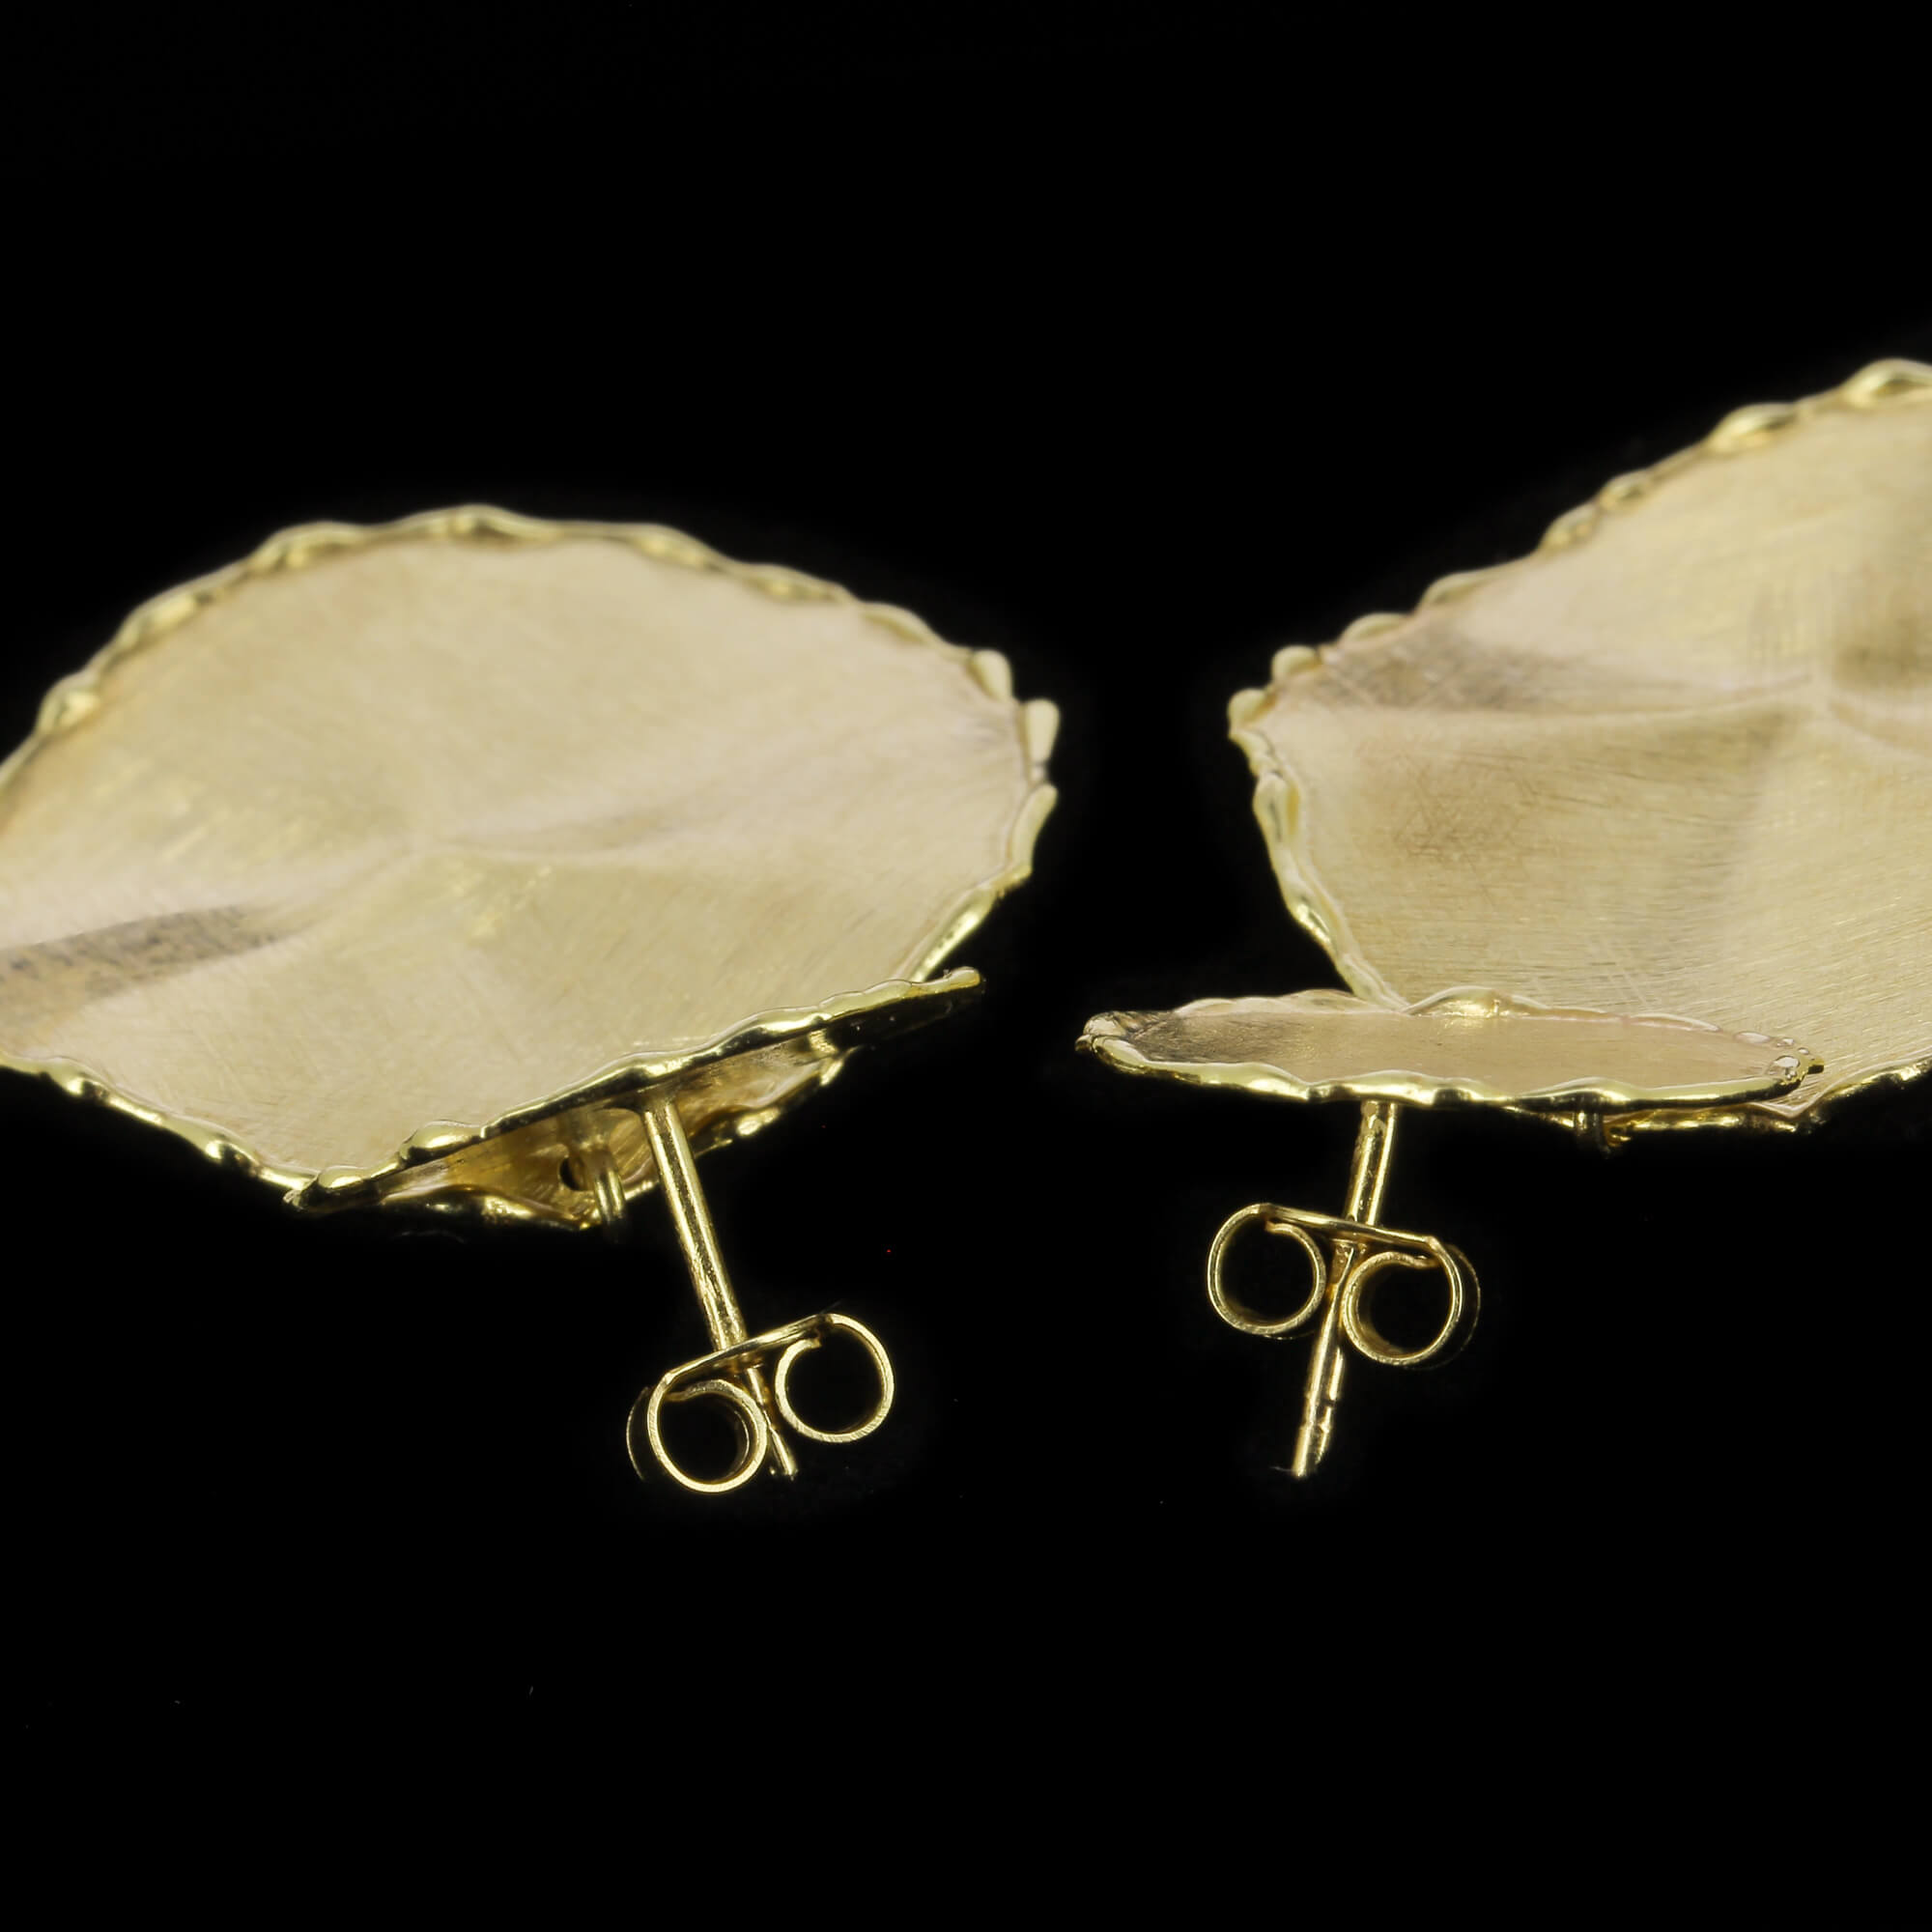 Golden round and unmeated earrings, 18kt